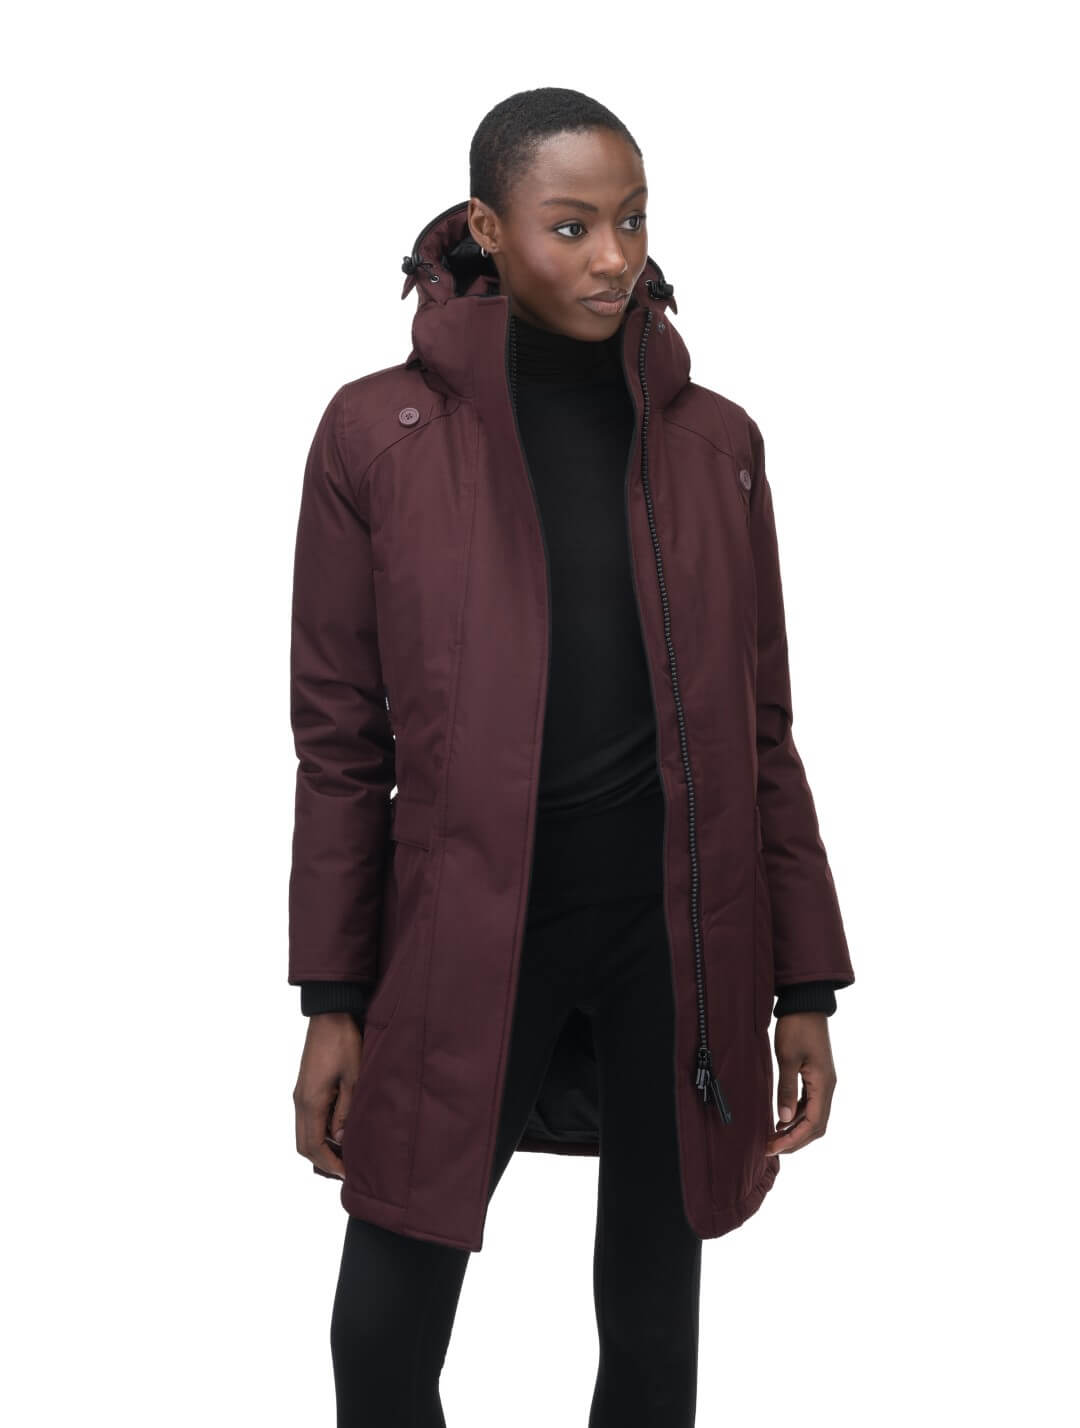 Merideth Furless Ladies Parka in thigh length, Canadian white duck down insulation, removable down-filled hood, centre-front two-way zipper with magnetic wind flap closure, four exterior pockets, and elastic ribbed cuffs, in Merlot